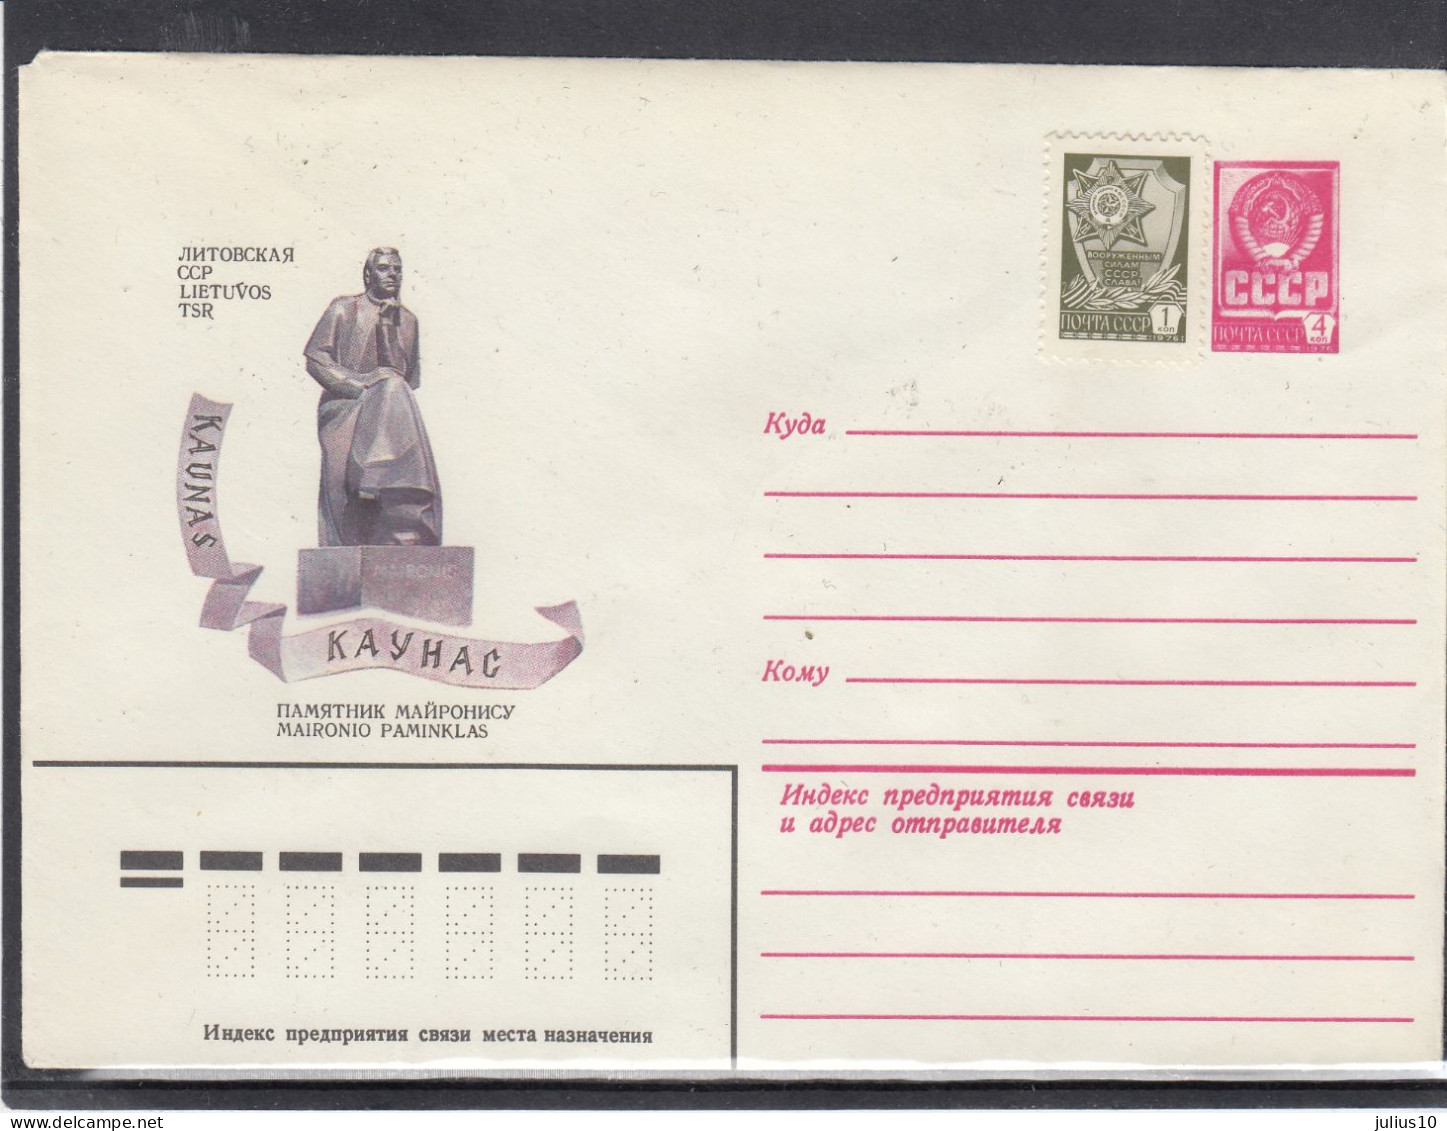 LITHUANIA (USSR) 1982 Cover Kaunas Poet Maironis Monument #LTV132 - Lithuania